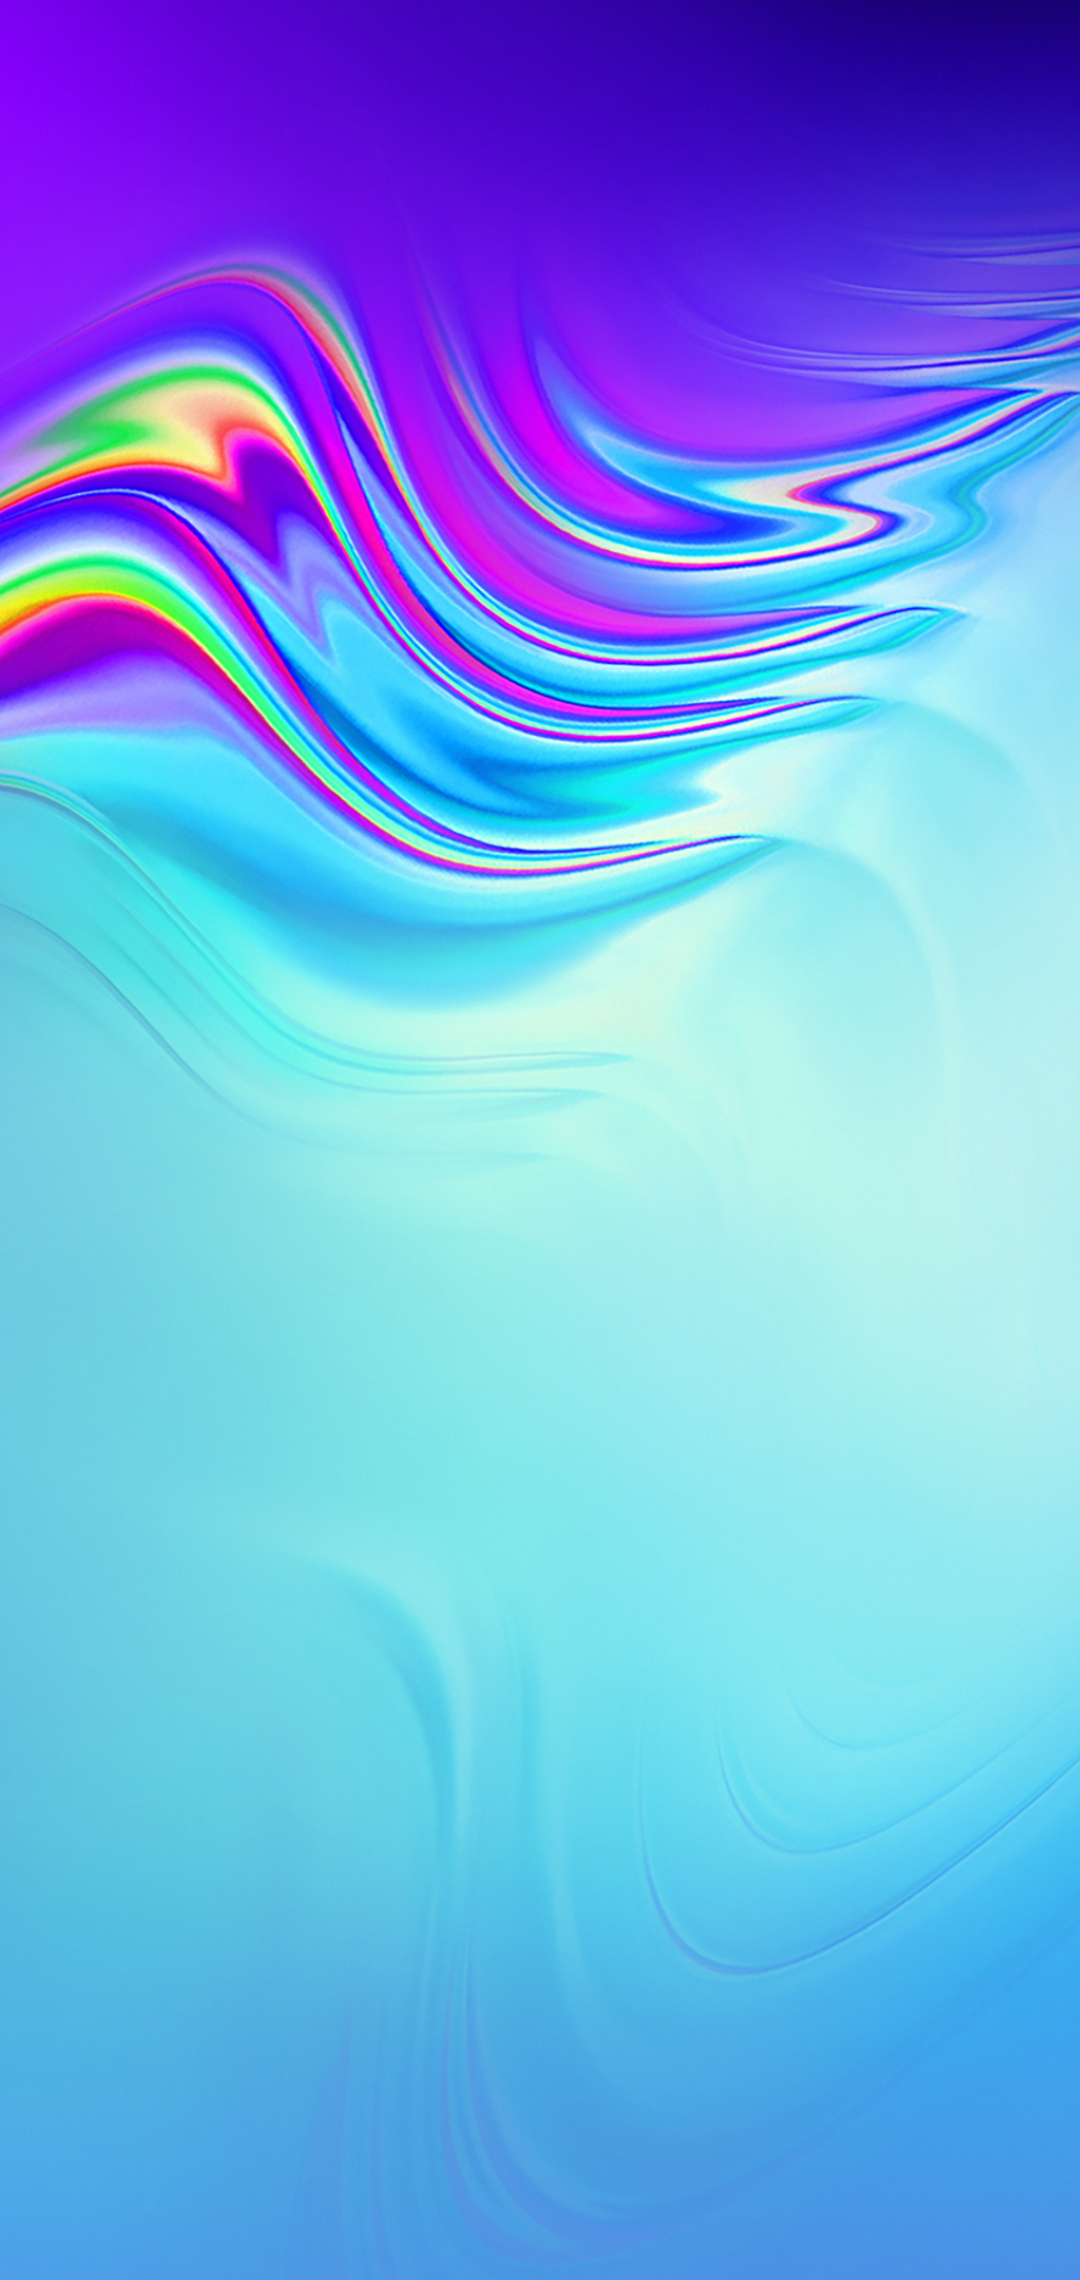 Download Samsung Galaxy S10 and S10 Plus Wallpapers [Official Total 7]